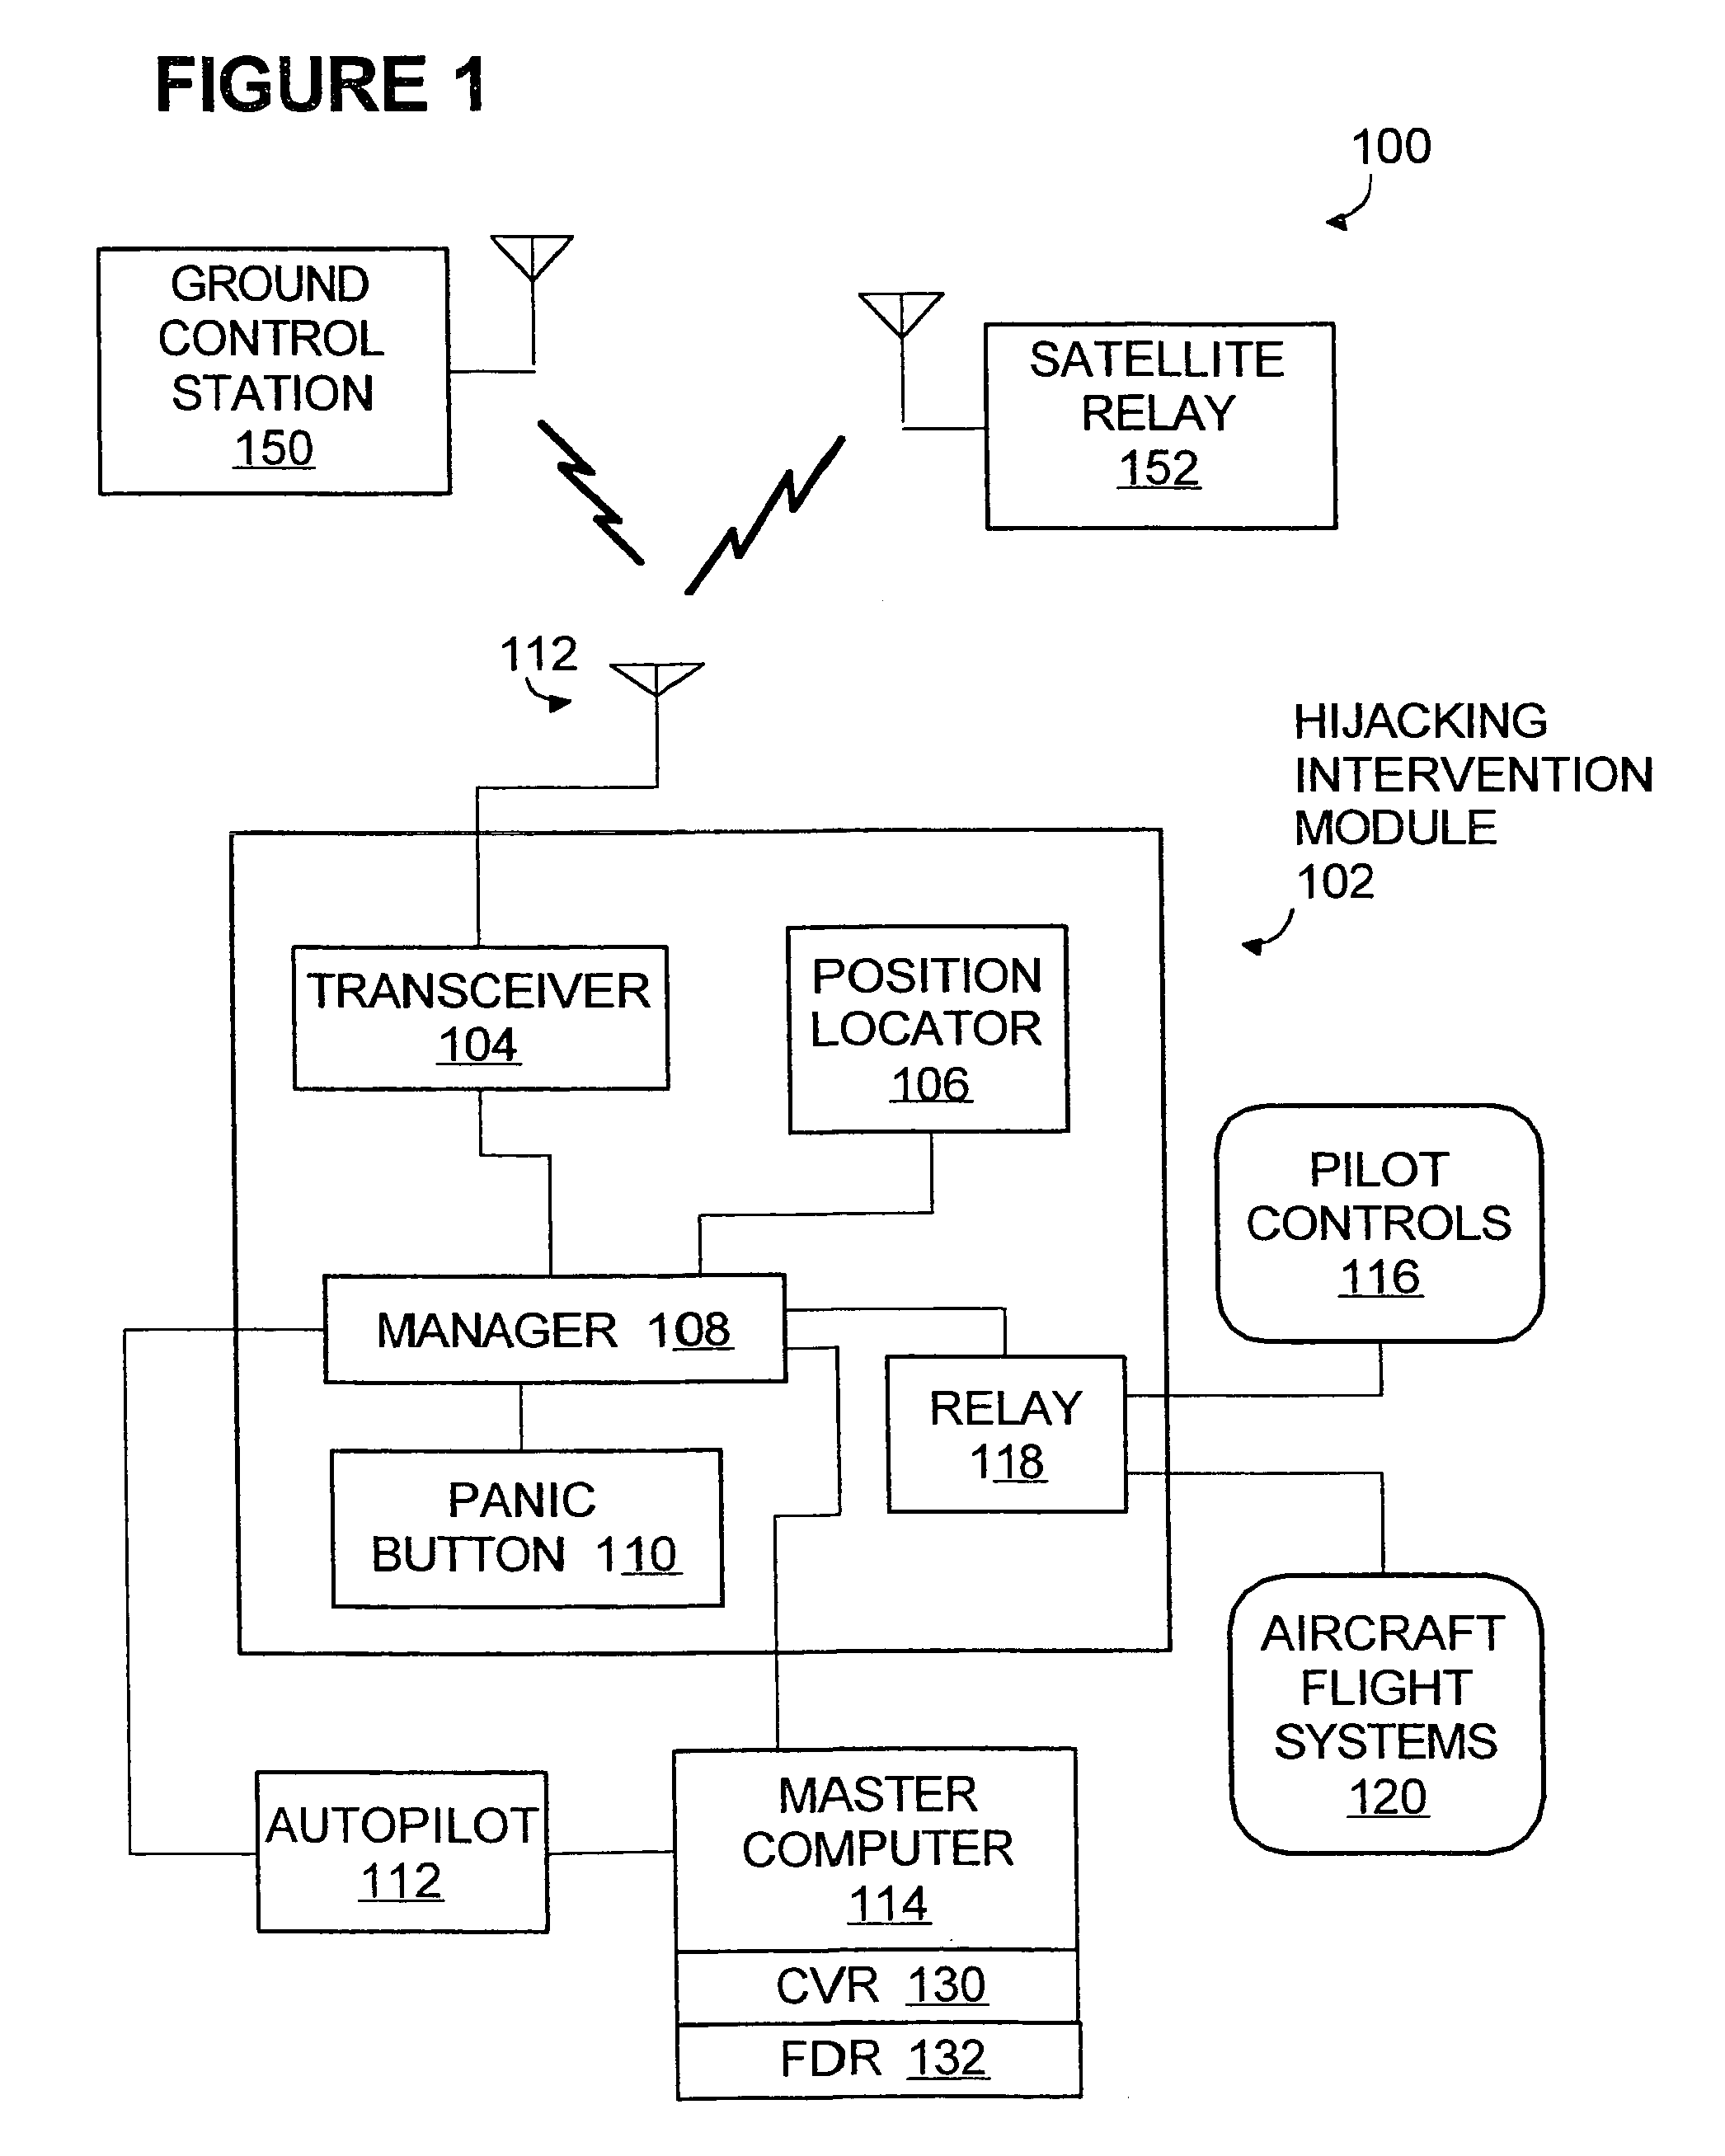 Anti-hijacking system operable in emergencies to deactivate on-board flight controls and remotely pilot aircraft utilizing autopilot